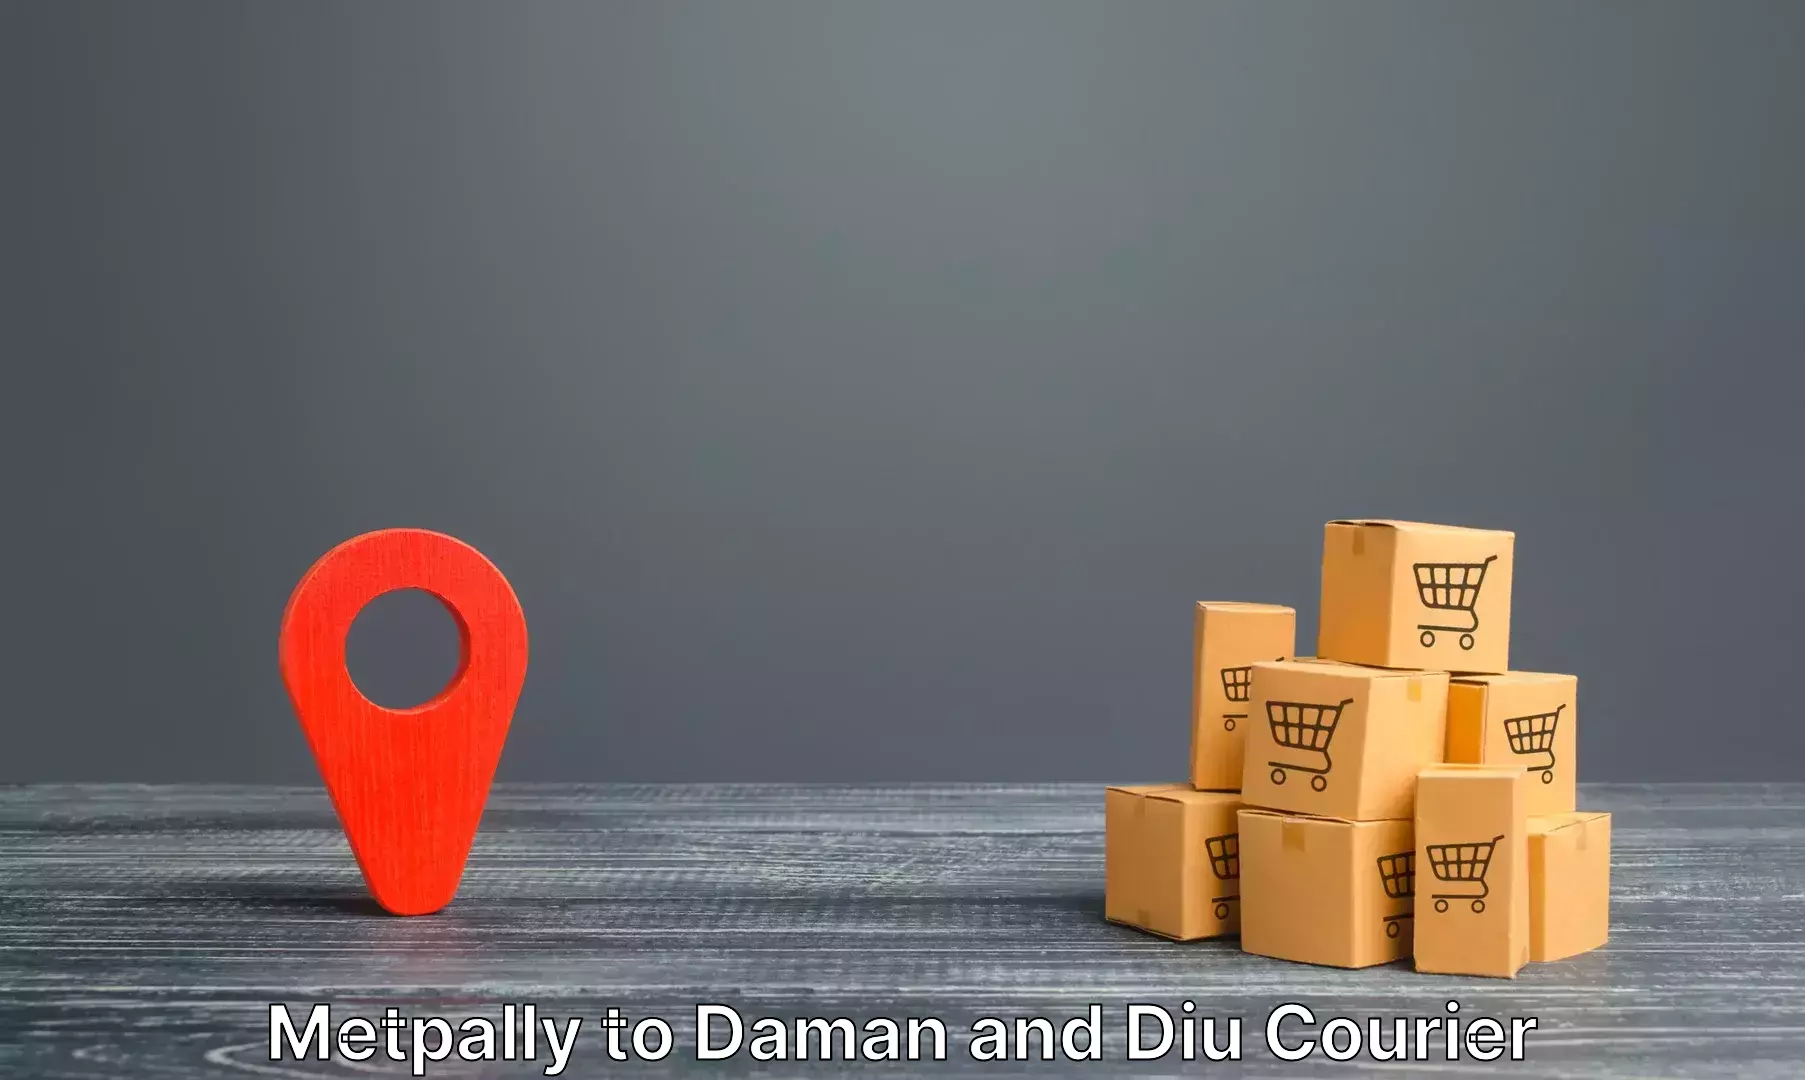 Baggage transport technology Metpally to Daman and Diu